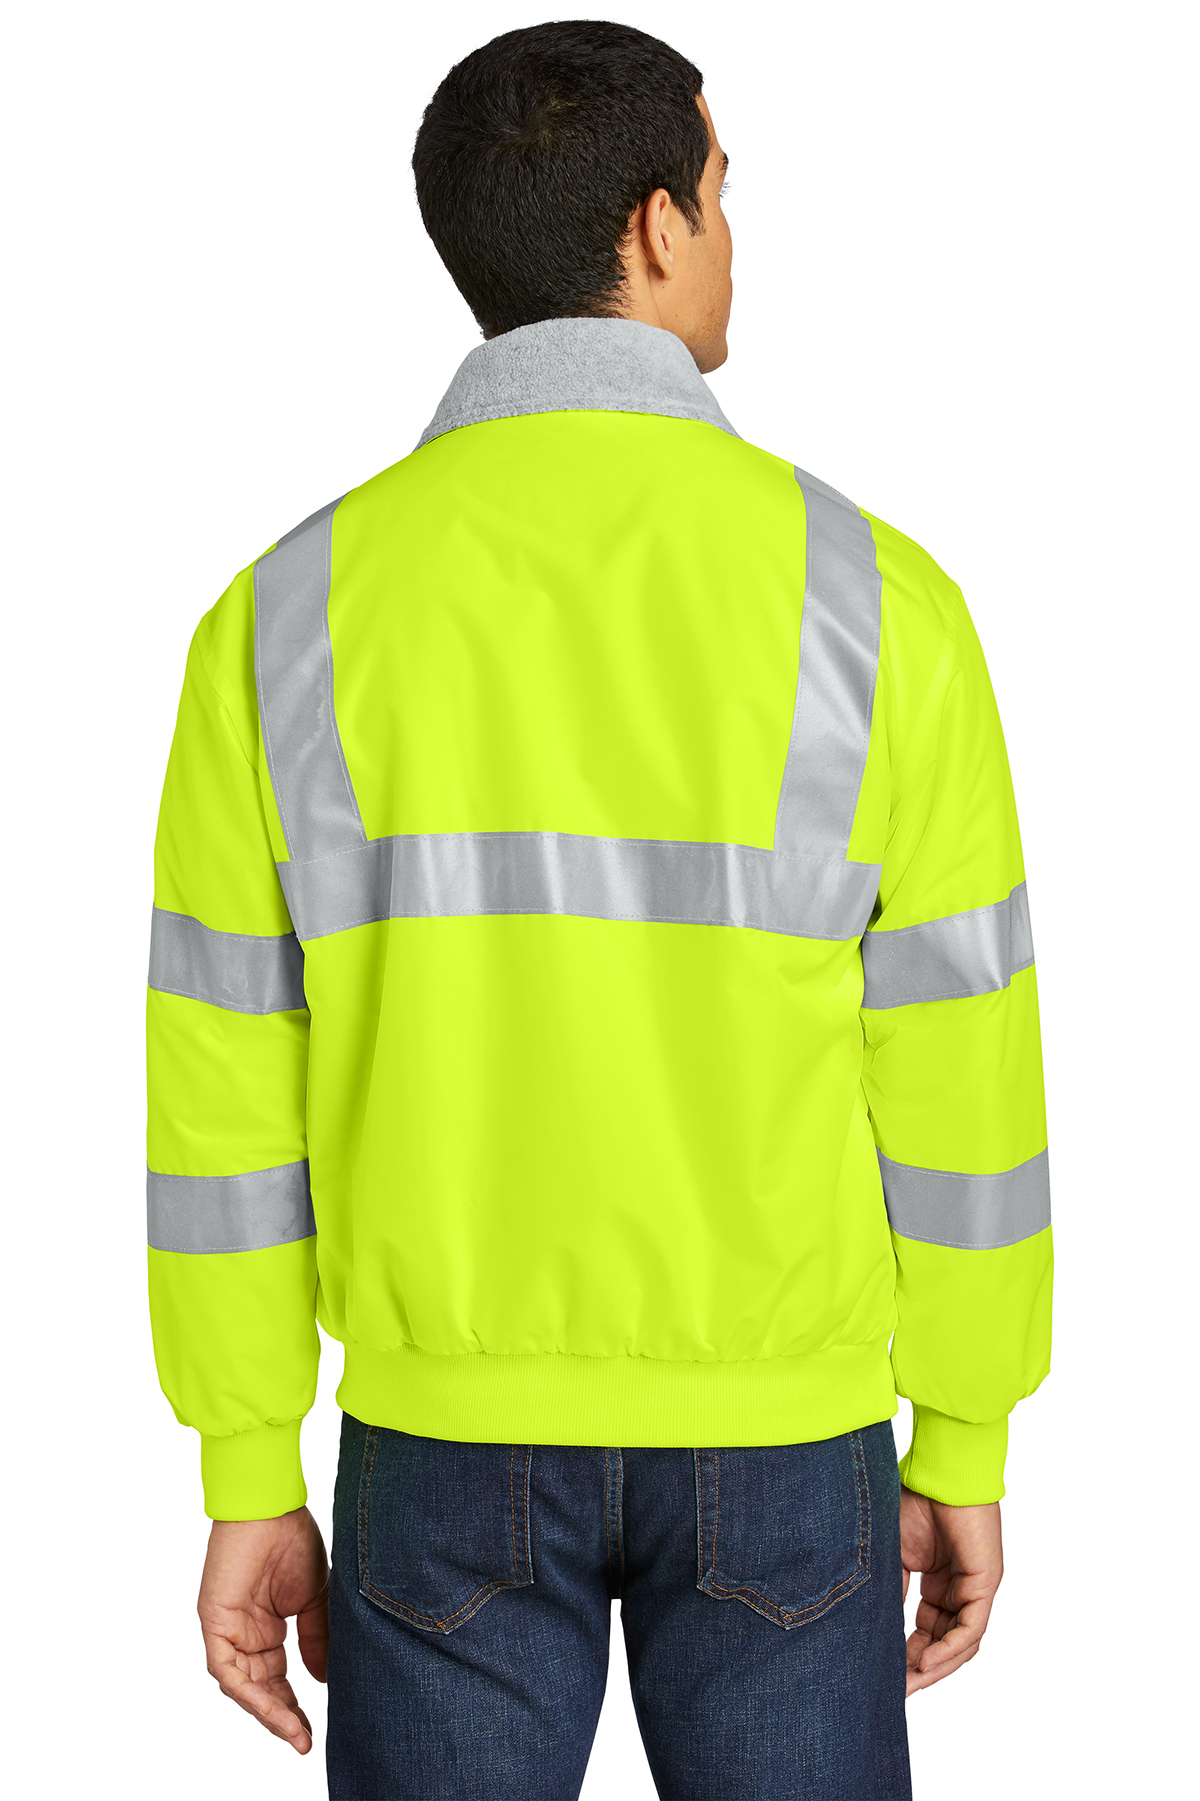 Port Authority 4XL Safety Challenger Jacket with Reflective Taping Safety Yellow and Reflective 